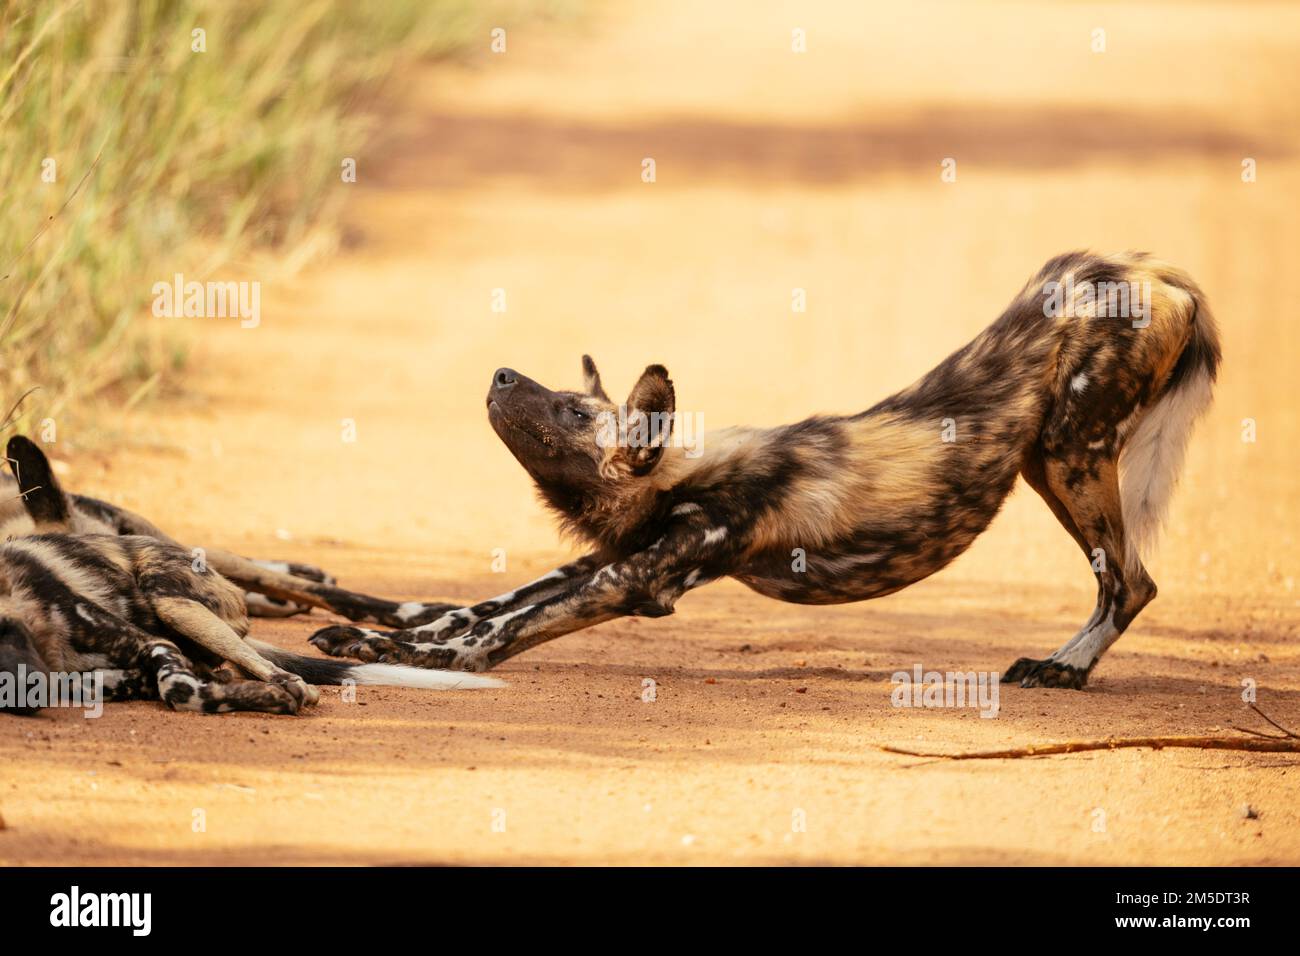 African Wild Dog (Painted Wolf), Timbavati Private Nature Reserve Reserve, Kruger National Park, South Africa Stock Photo